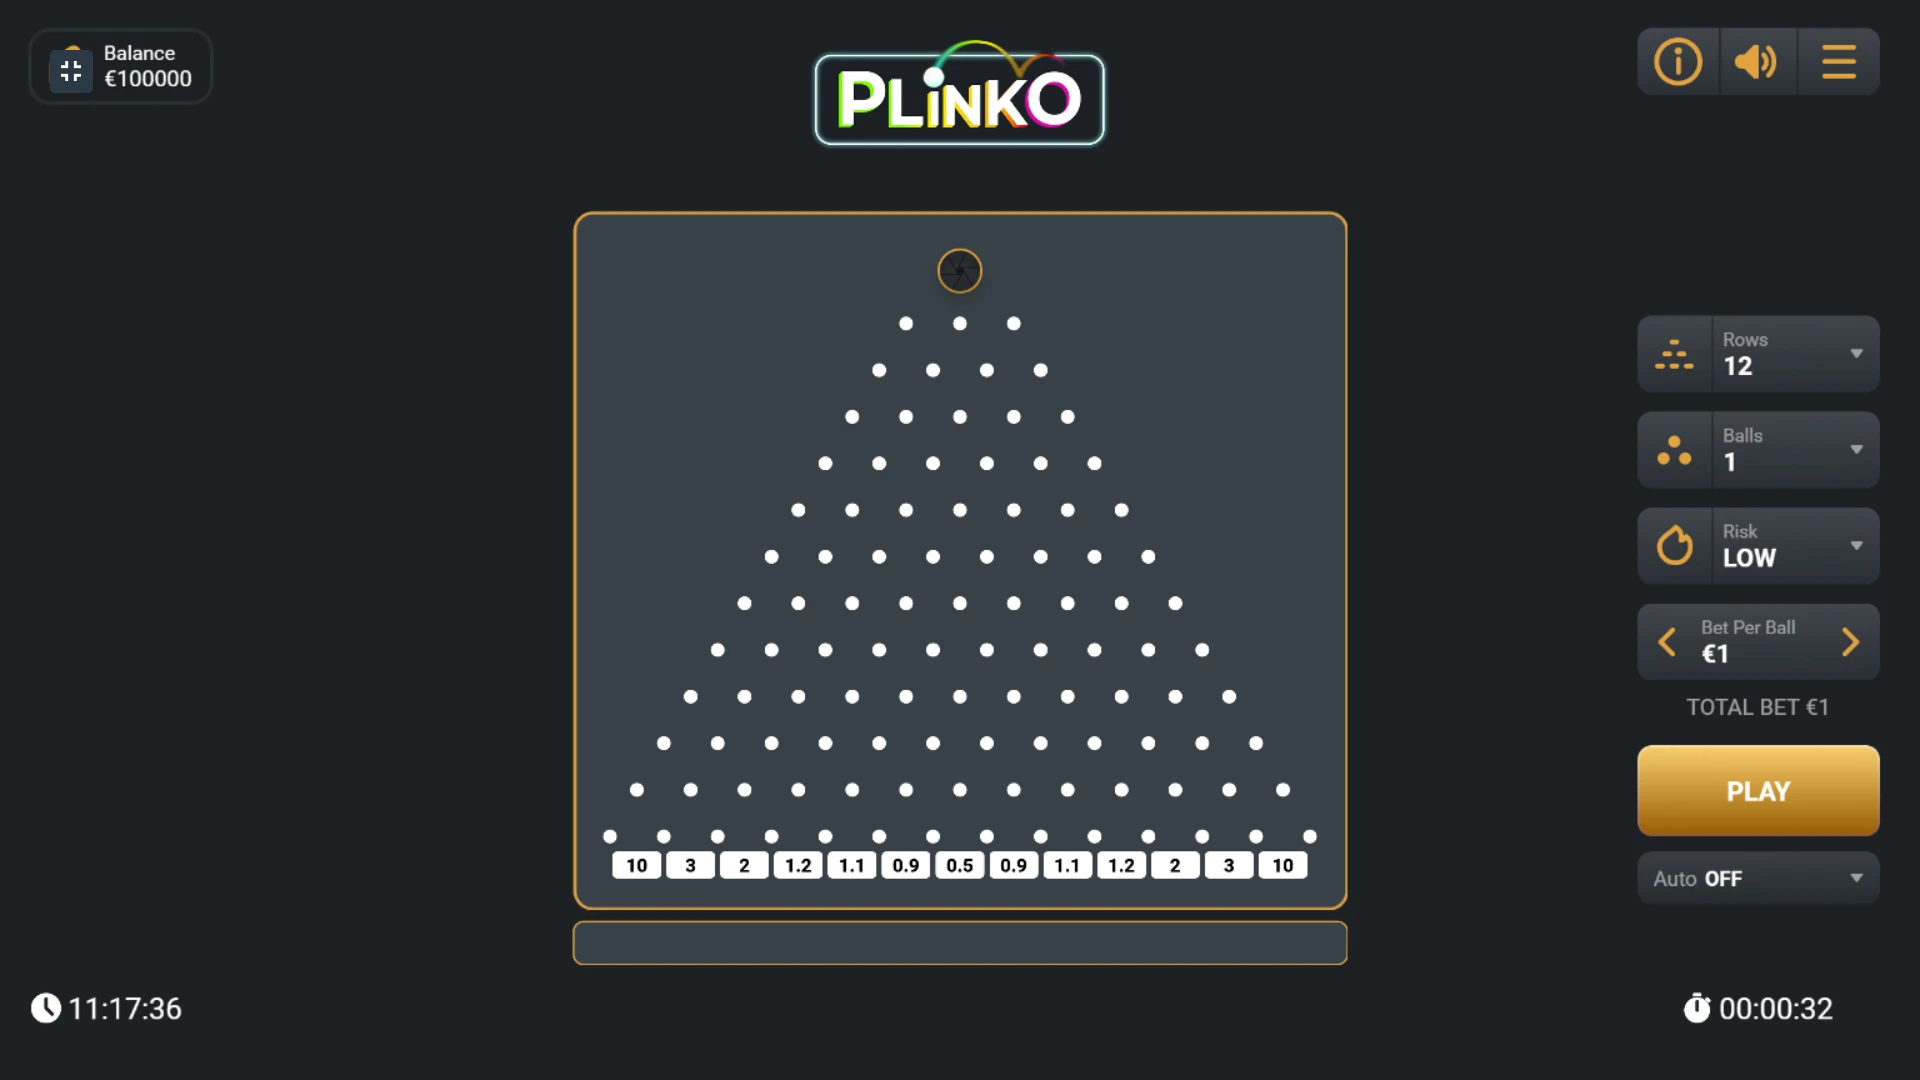 We provide you with one of the Plinko game options.